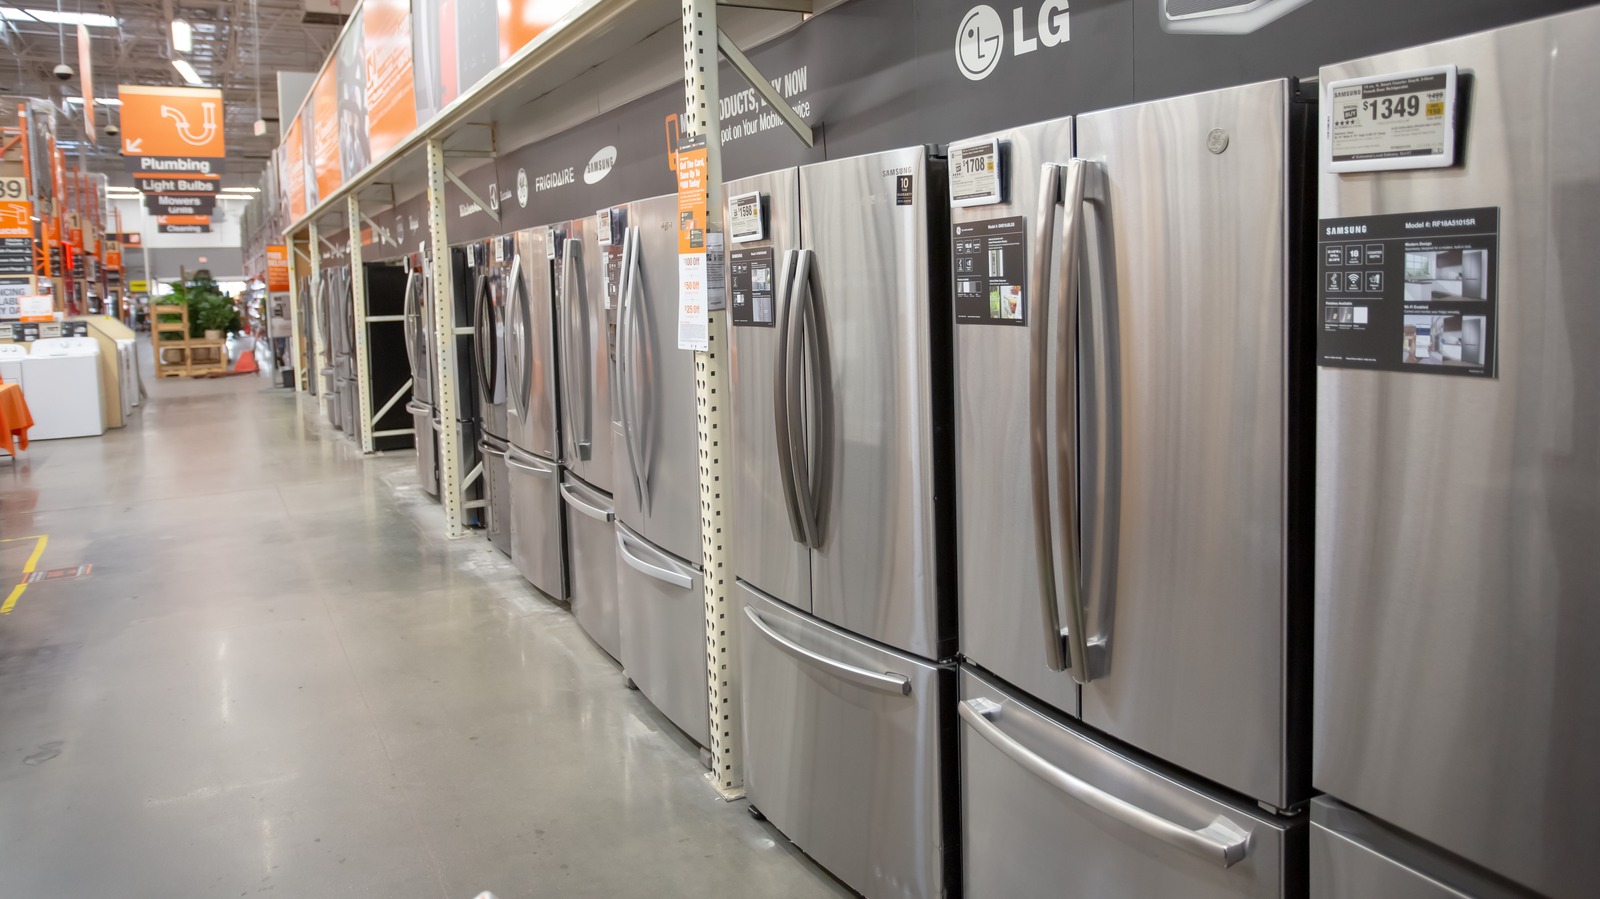 The Most Reliable Home Appliance Brands, Ranked